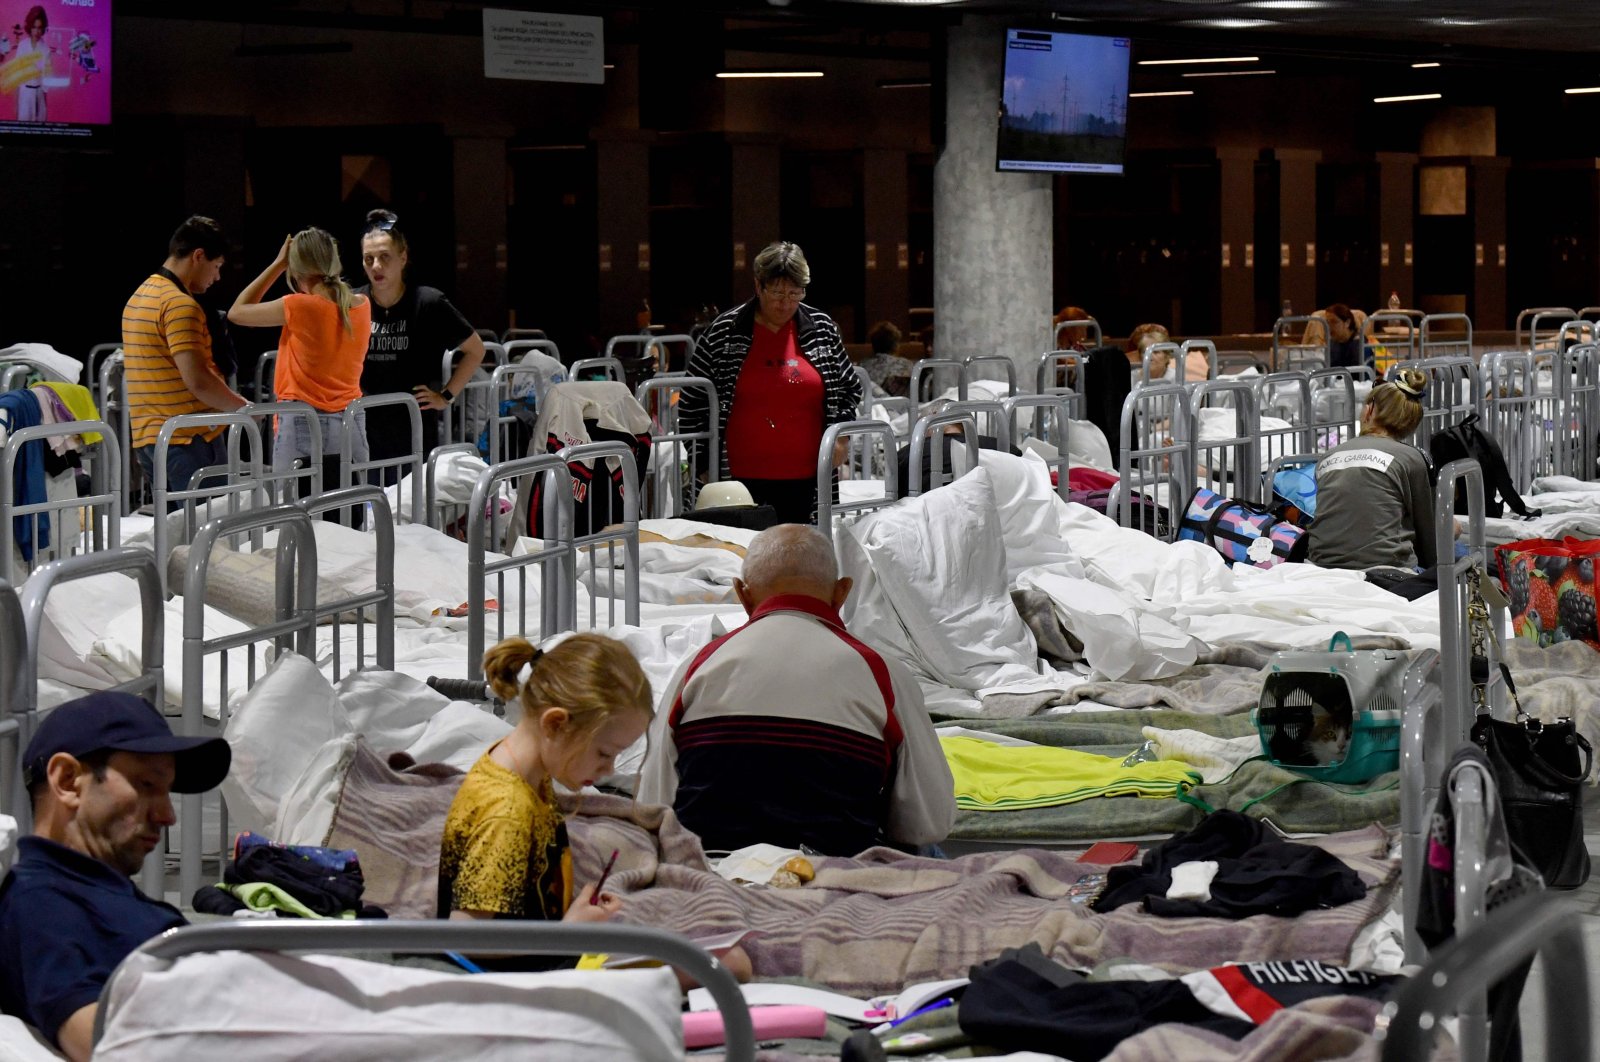 Residents, including those evacuated from the town of Shebekino, are seen settled in a temporary shelter set up at the Belgorod Arena in the regional capital of Belgorod on June 2, 2023. (AFP Photo)